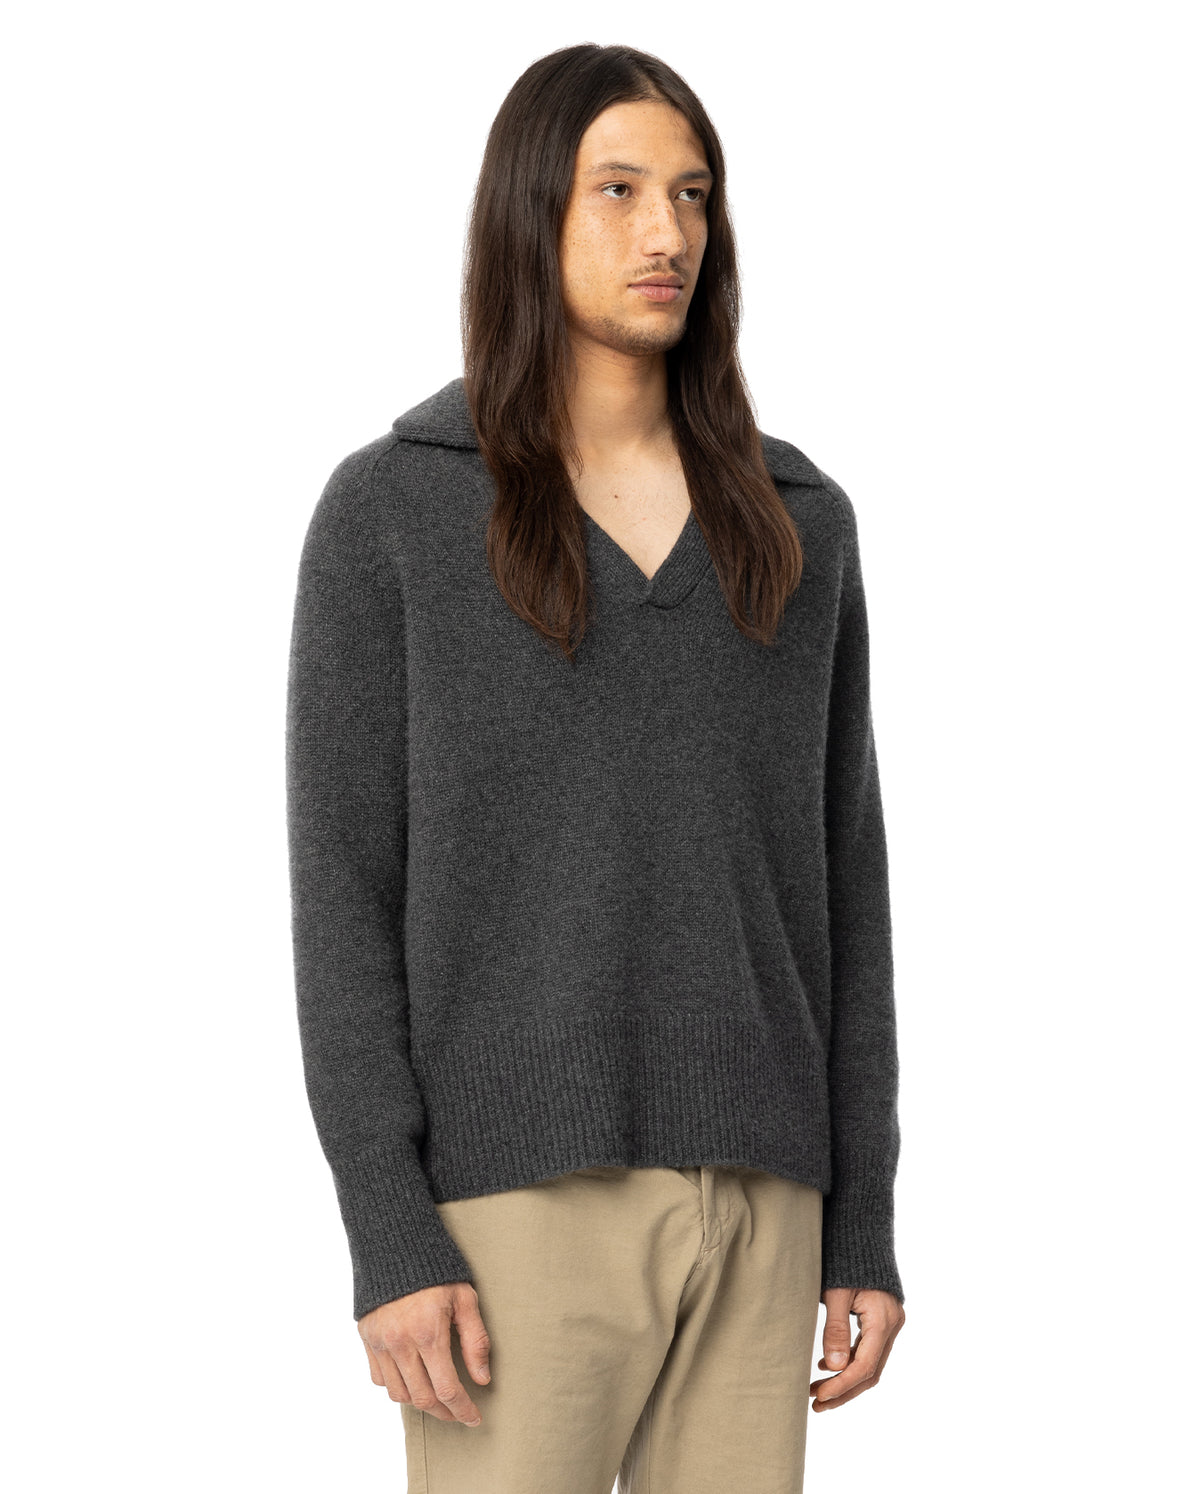 Mr Clifton Gate V-Neck Sweater - Charcoal